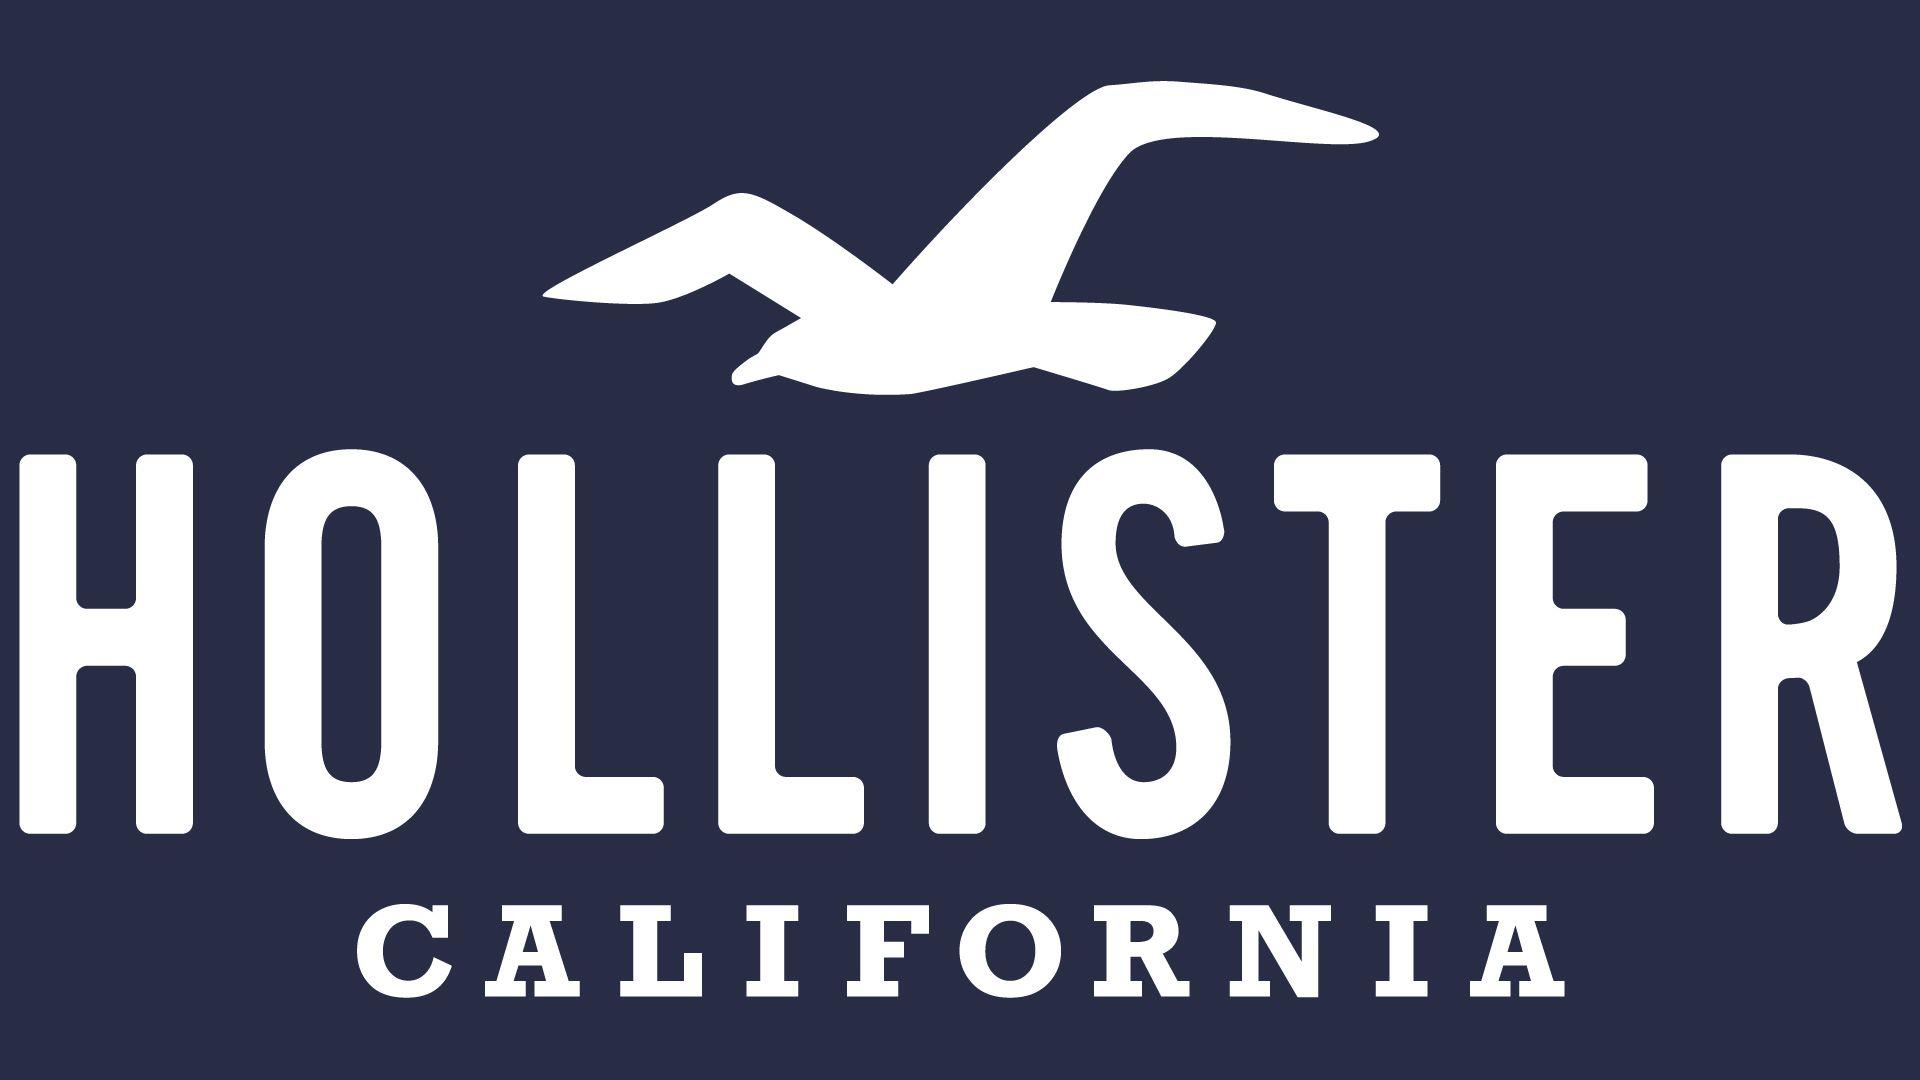 Hollister Logo - Hollister Logo, Hollister Symbol Meaning, History and Evolution